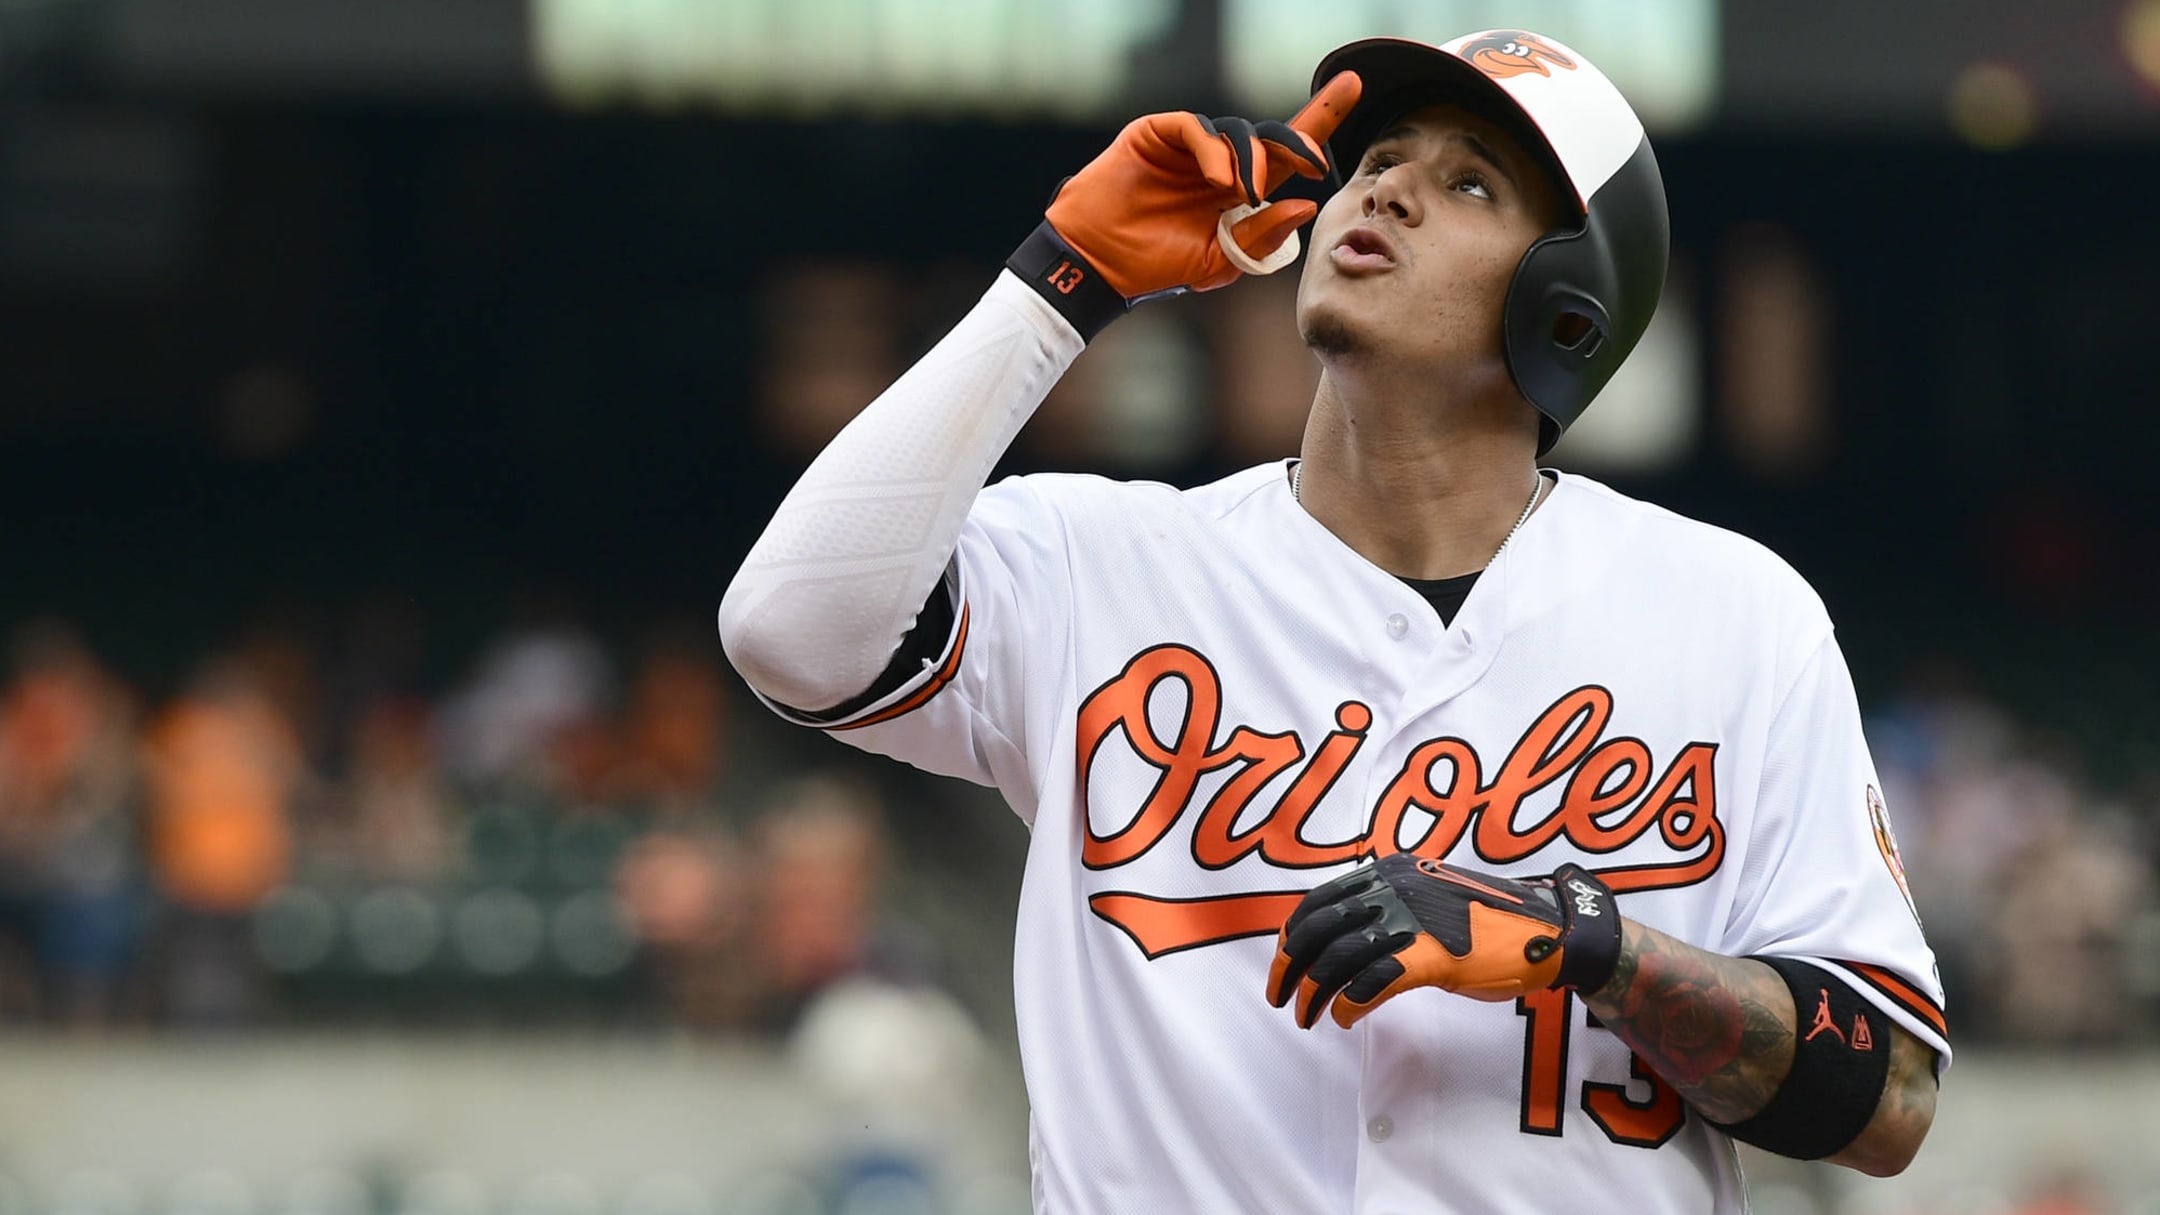 Manny Machado's jersey number with Dodgers a tribute to Orioles legend?